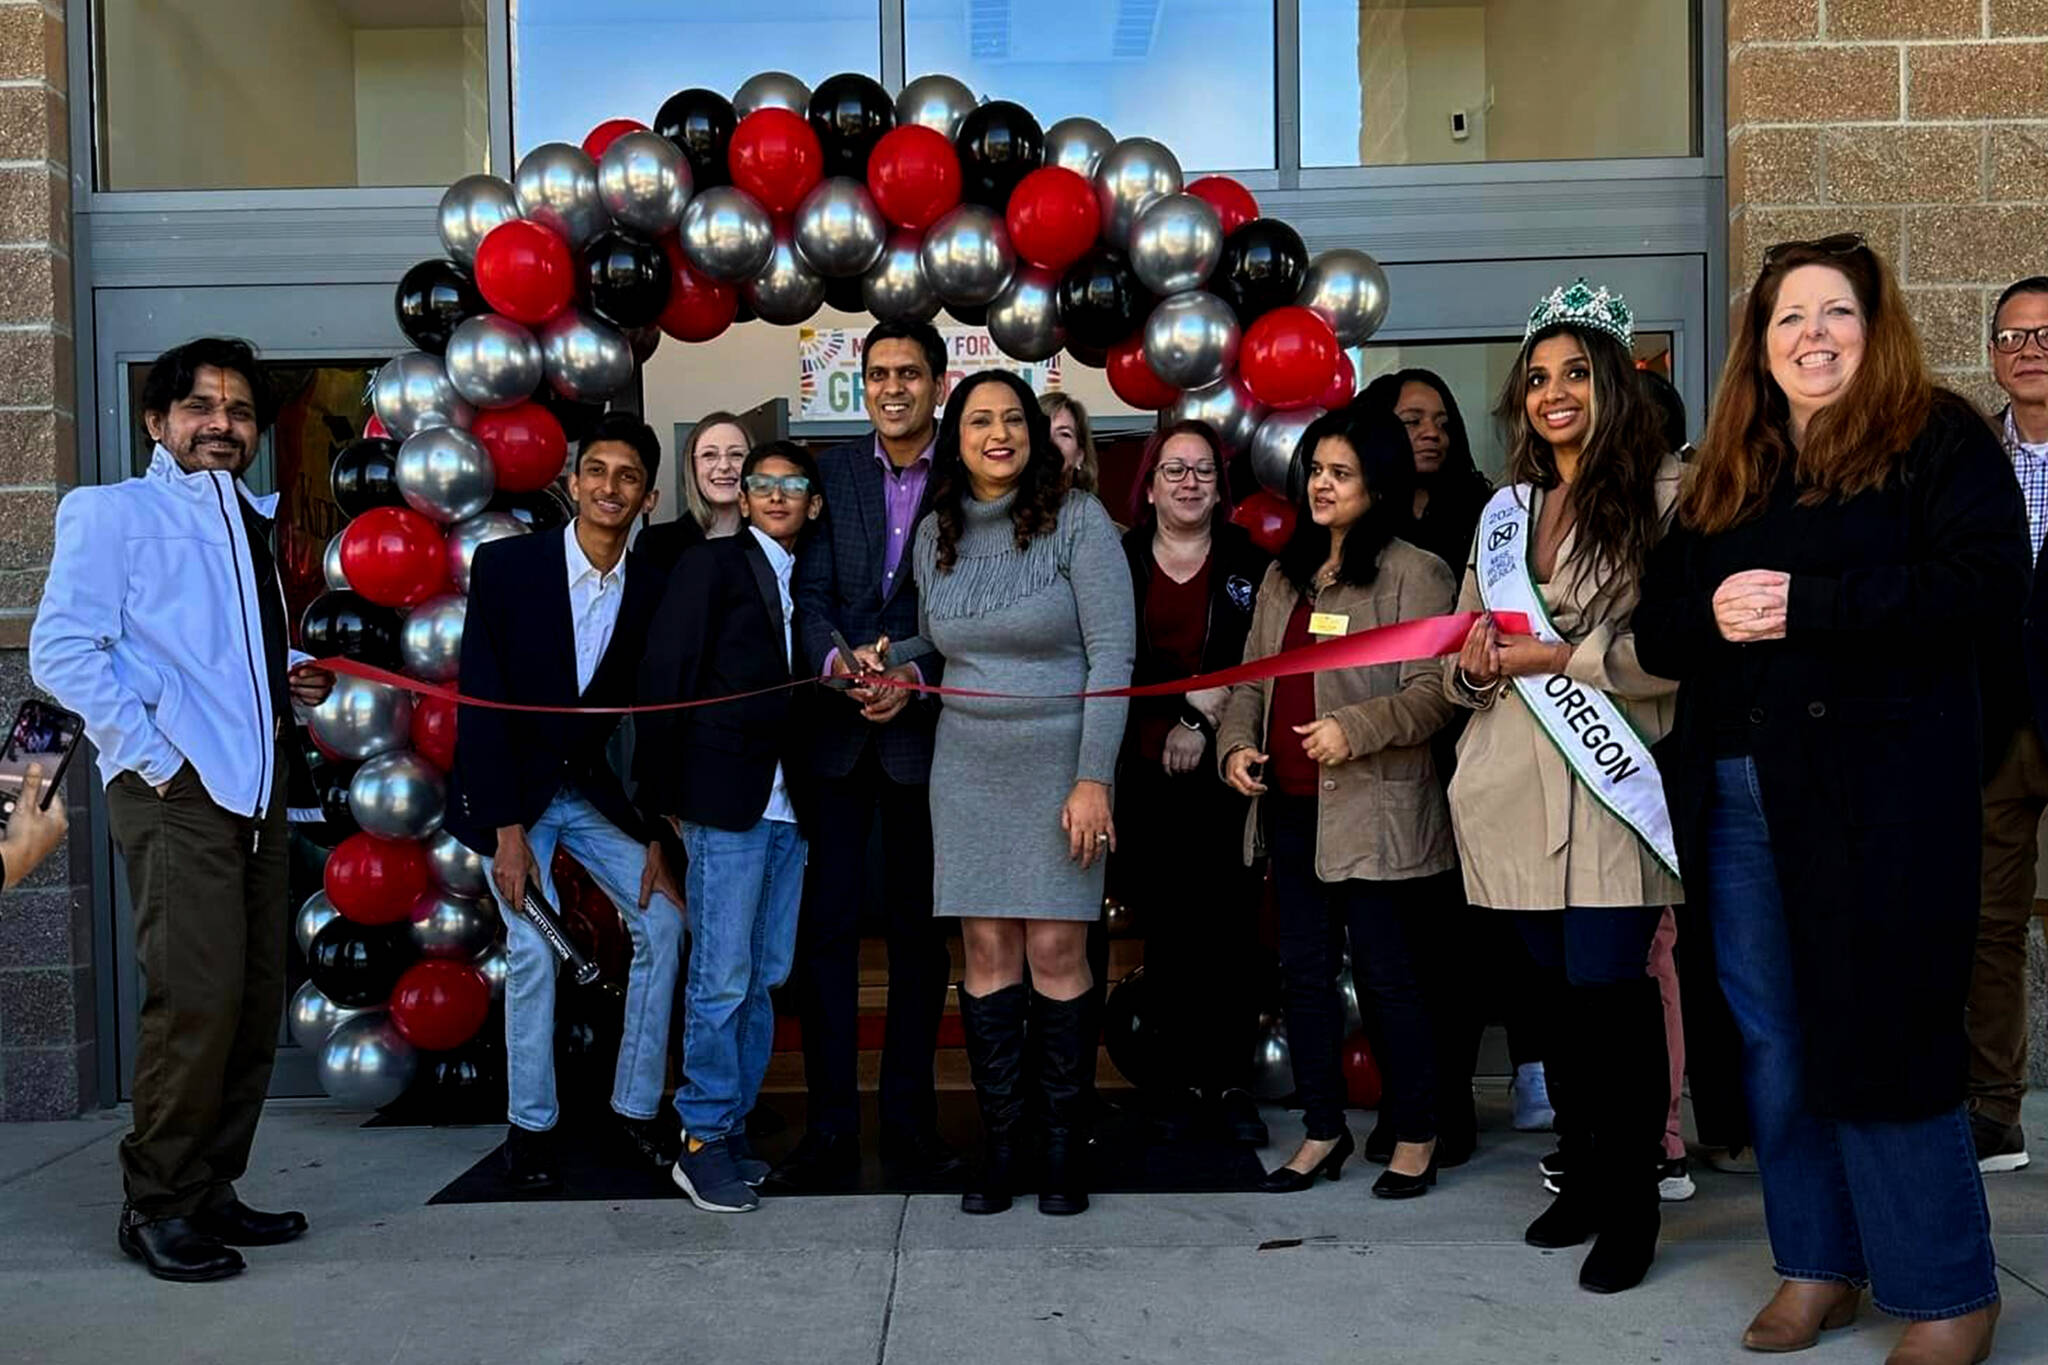 The Kiddie Academy of Snoqualmie celebrates its grand opening at 7730 Center Blvd. SE. The center was opened by Vasudha Sharma, a doctor, author and nonprofit CEO. Photo Courtesy of SnoValley Chamber of Commerce.